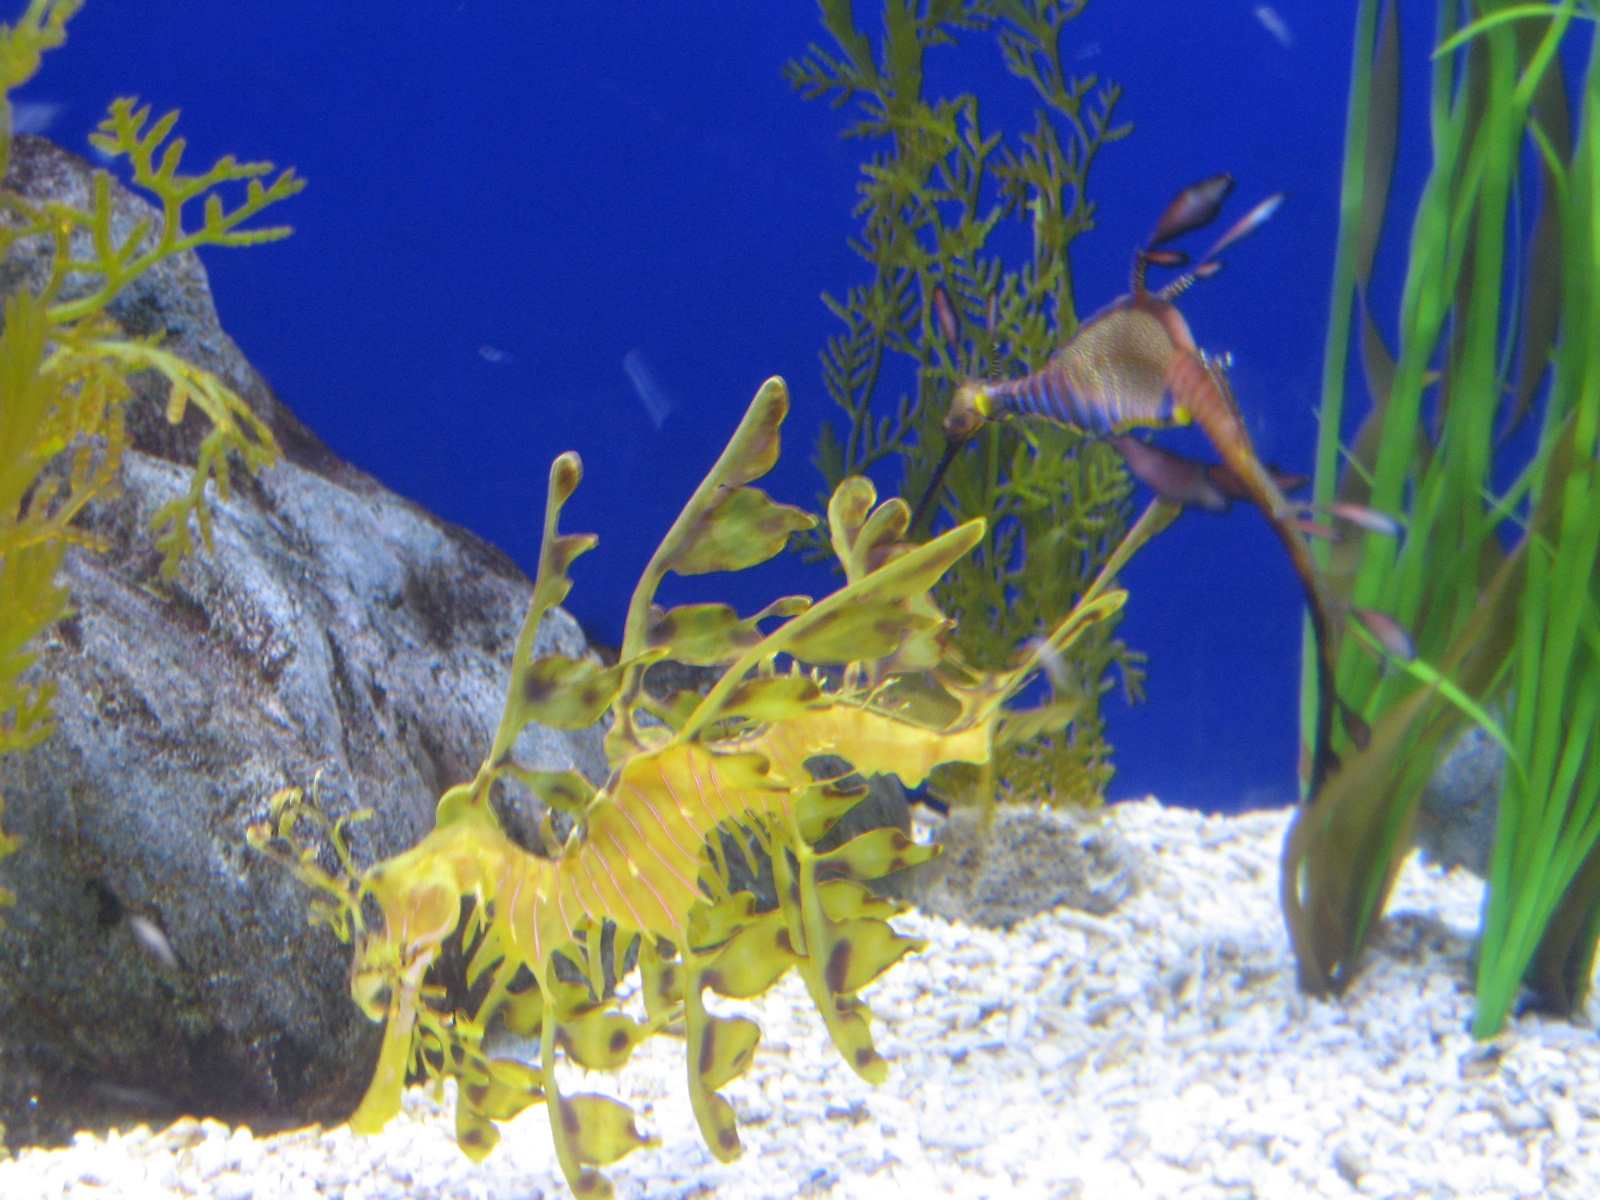 an image of seaweed and other aquatic species in an aquarium